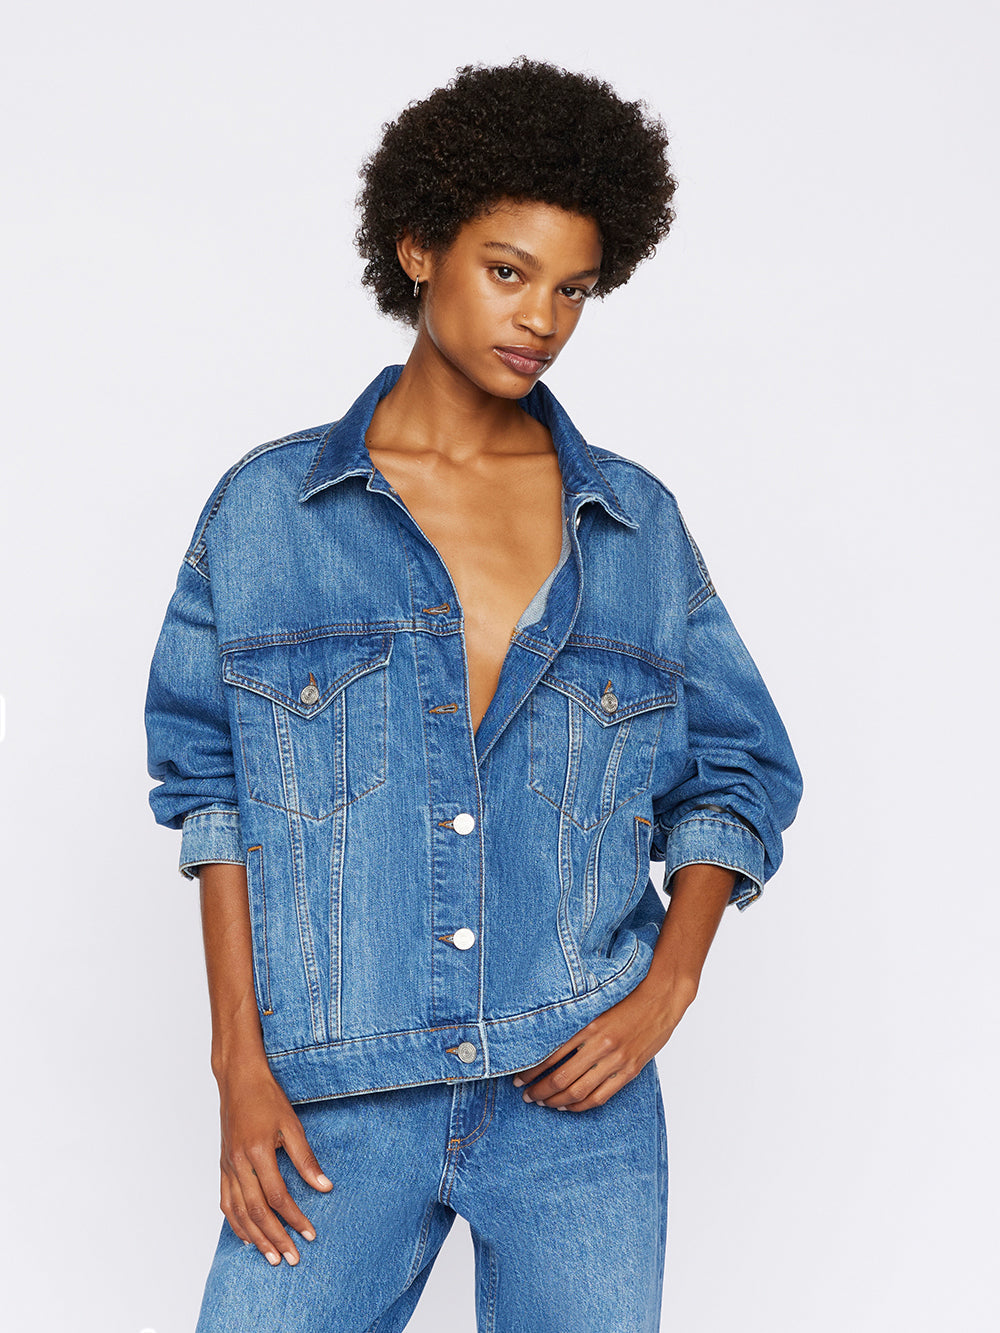 Save 60% on Le Oversized Jacket -- Stearnlee Attractive 's timeless ...